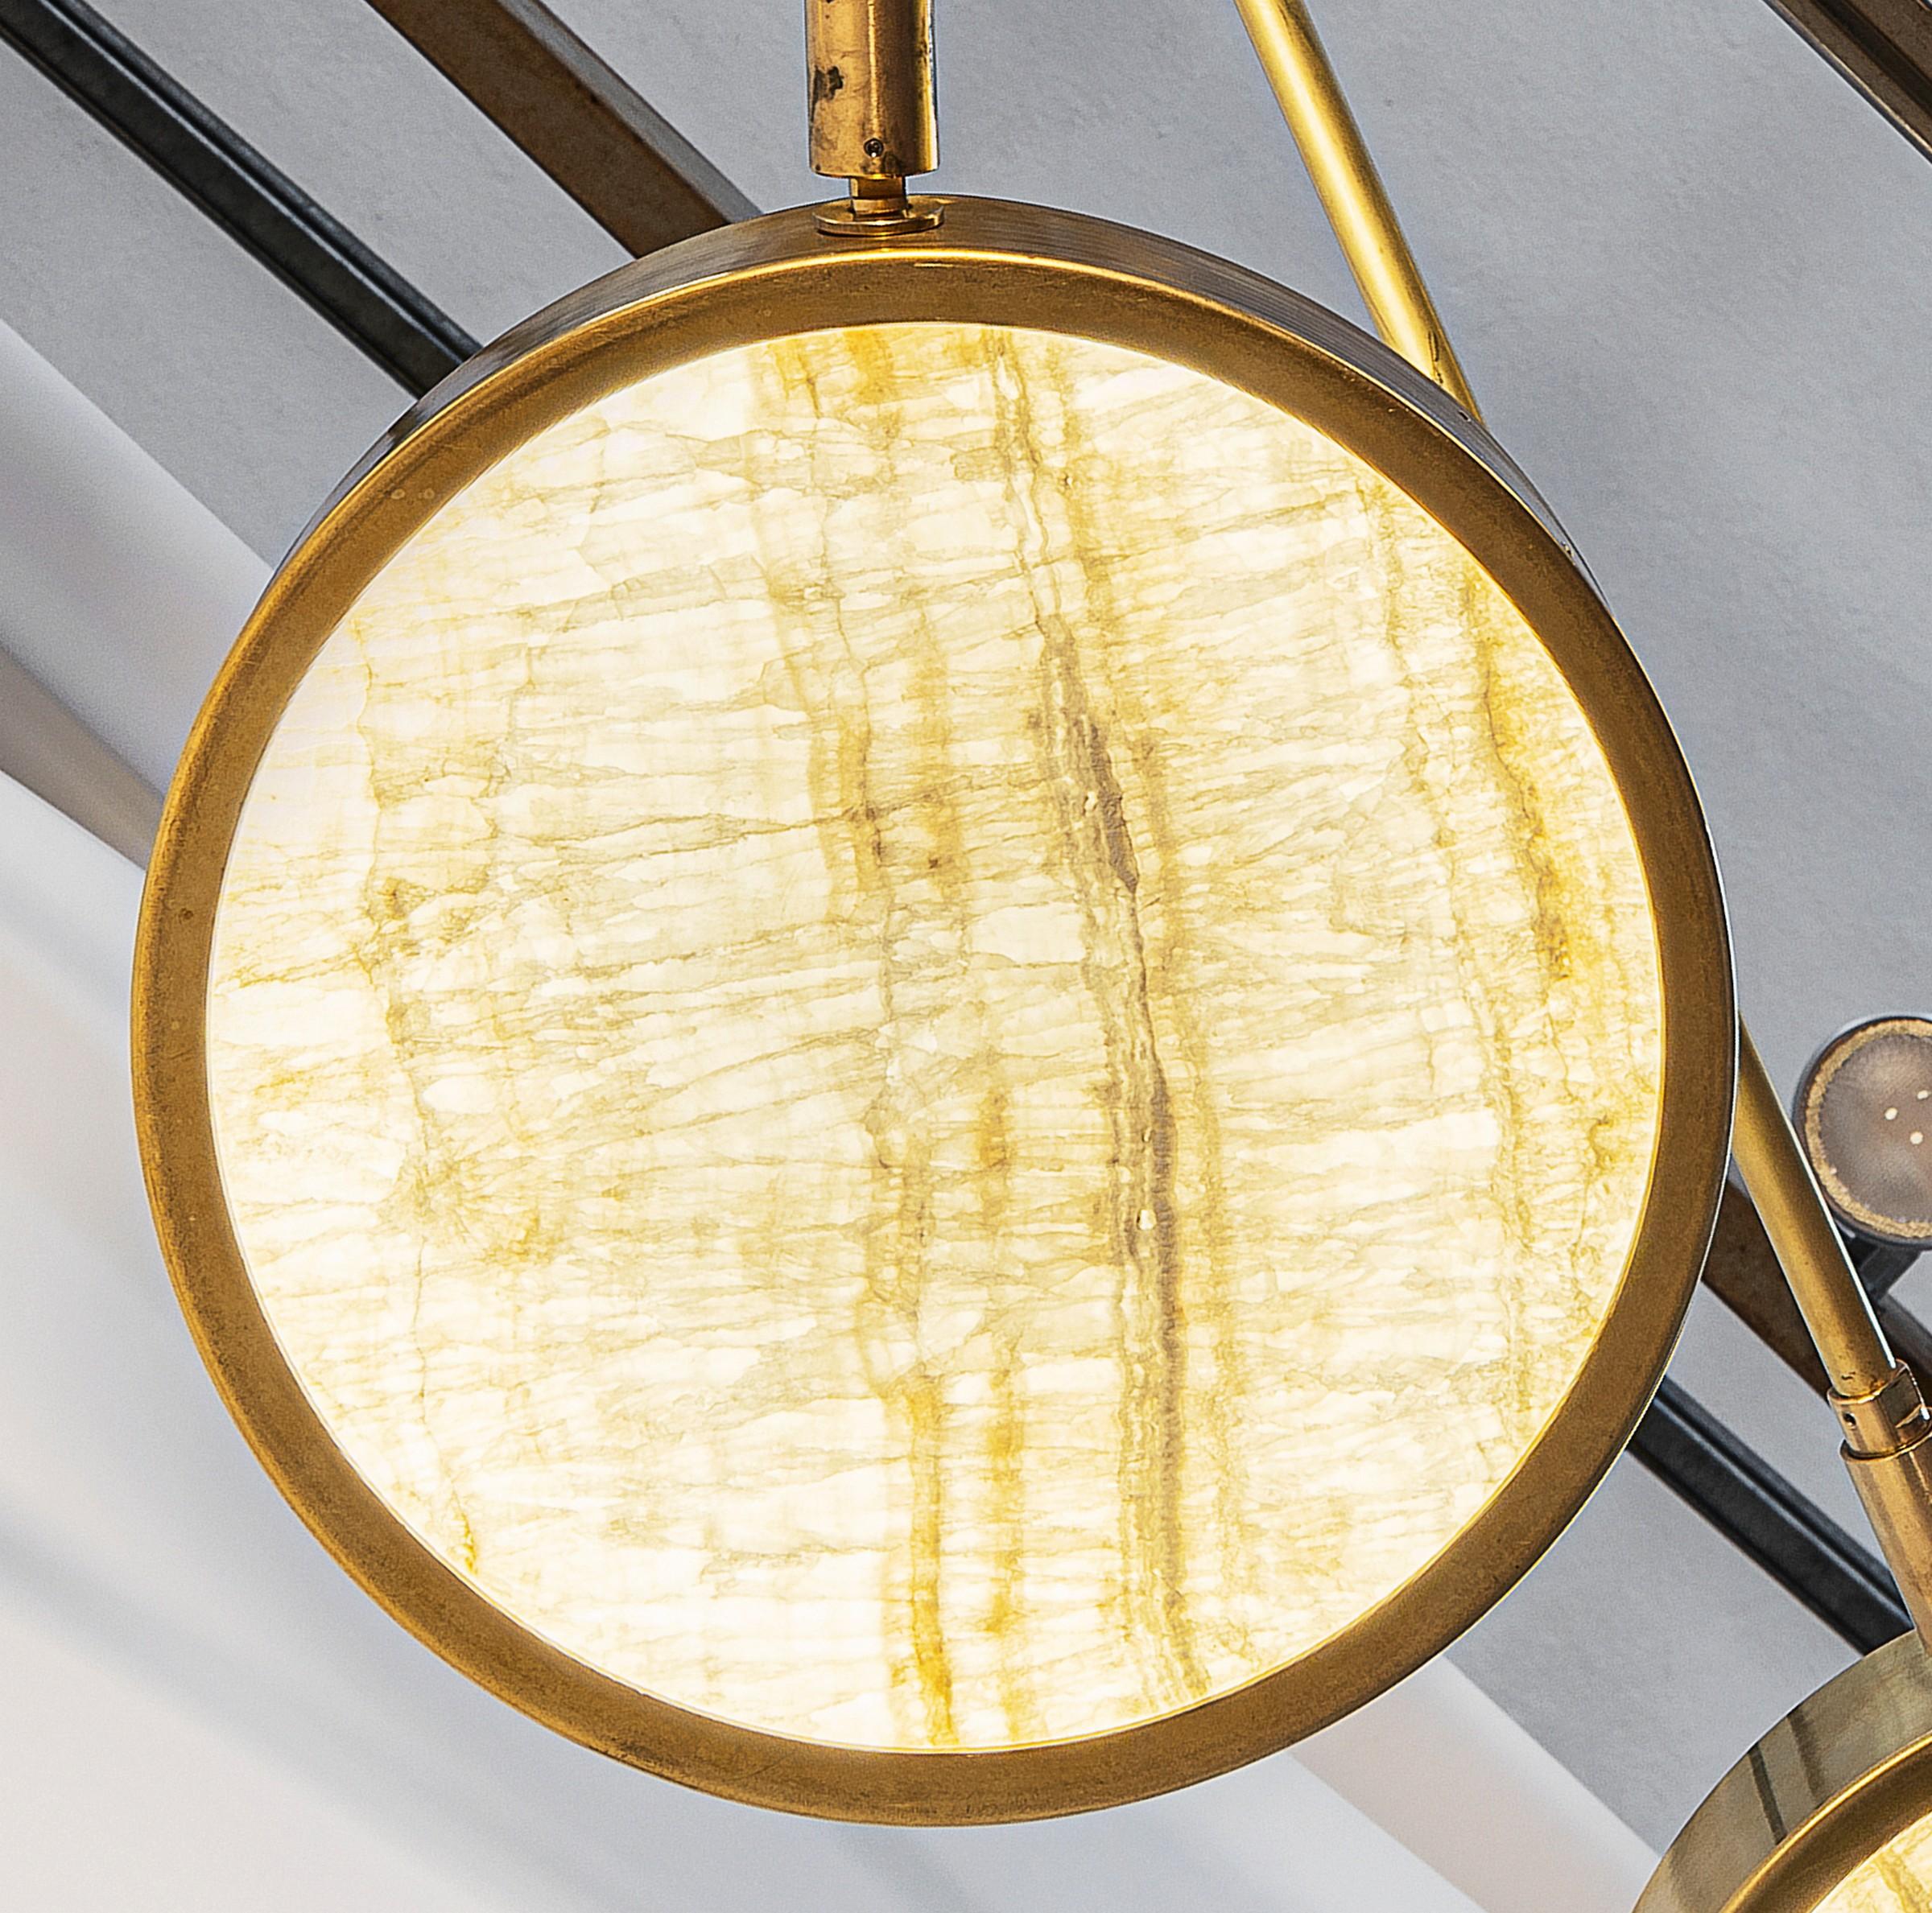 Patinated Sistema Solare Chandelier, Piattelli Design, Ivory-Toned Onyx and Brass, 8-Shade For Sale